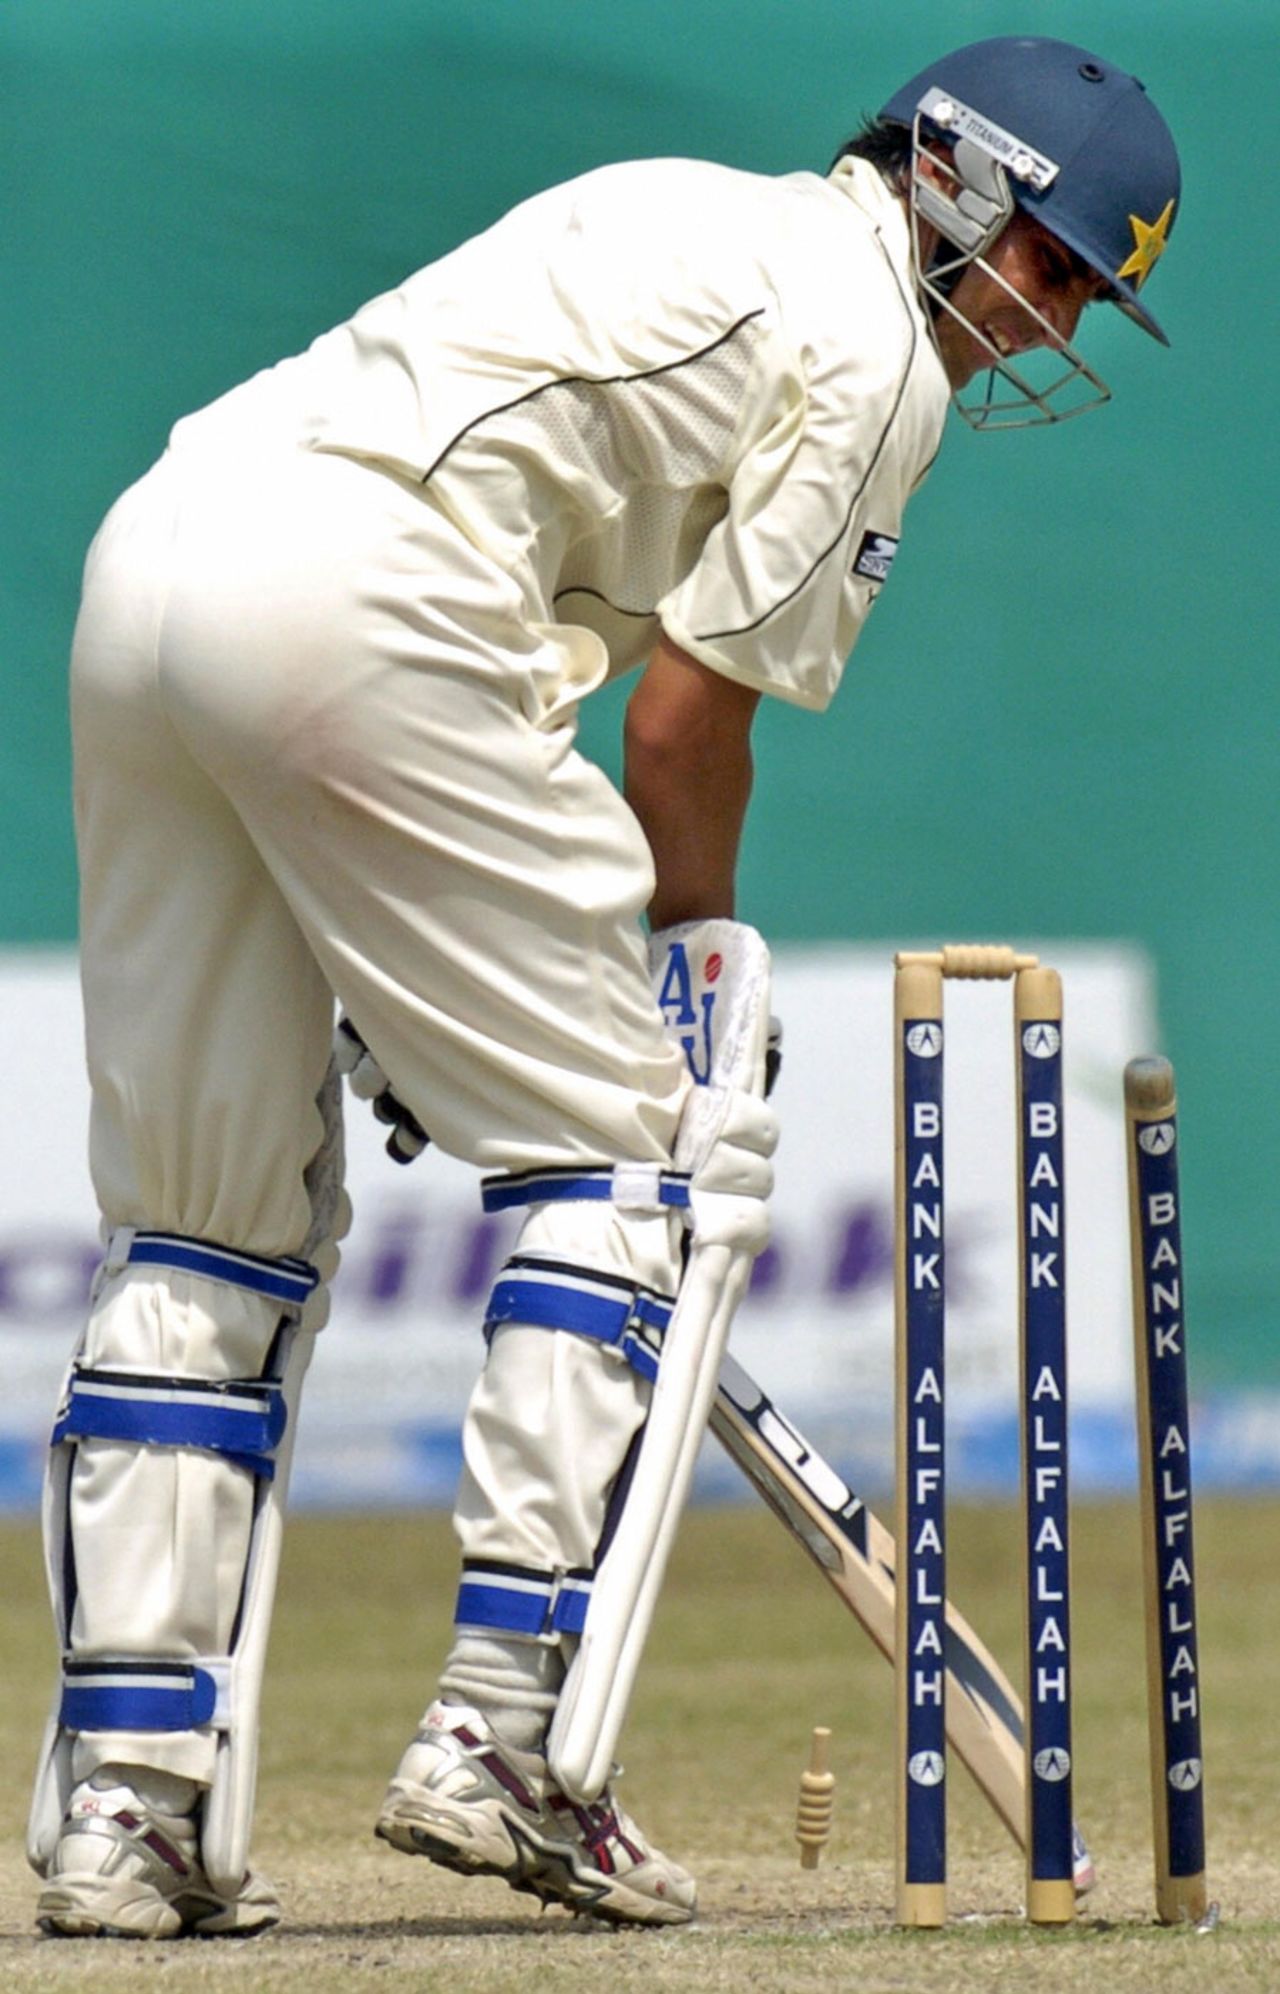 Younis Khan misses the line and is bowled by Dale Steyn, Pakistan v South Africa, 1st Test, Karachi, 5th day, October 5, 2007